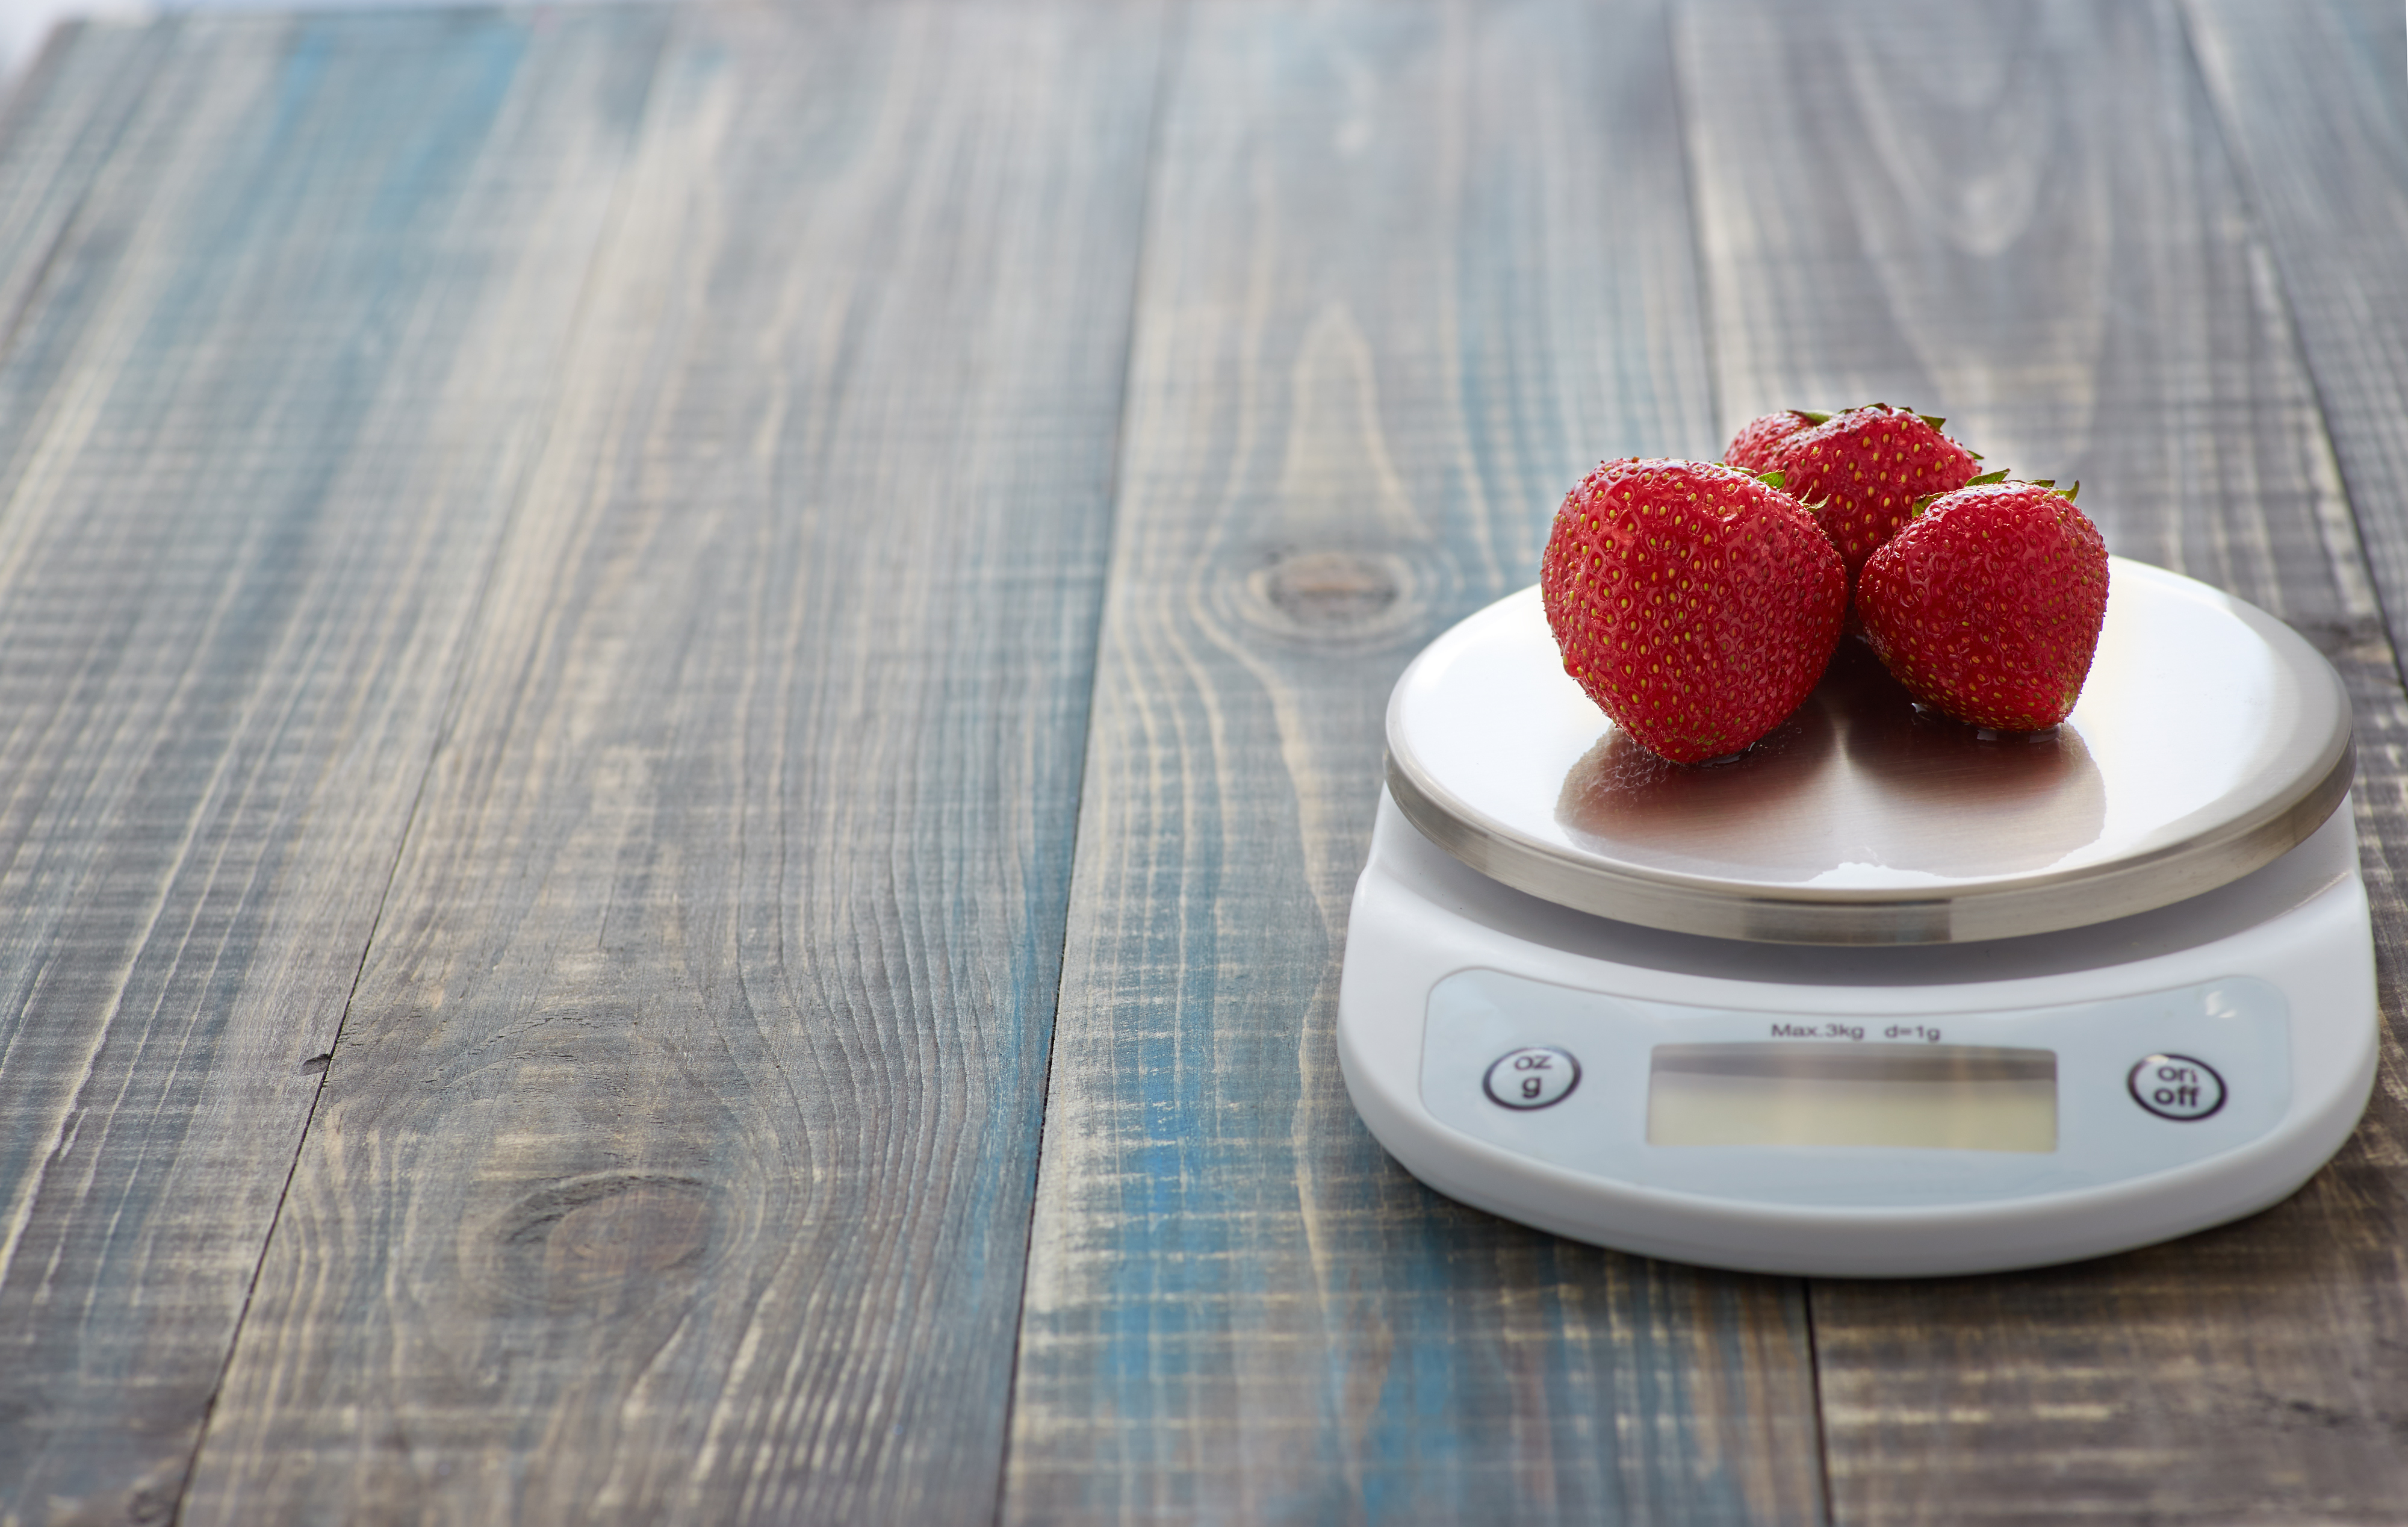 How To Calibrate a Bathroom Scale 